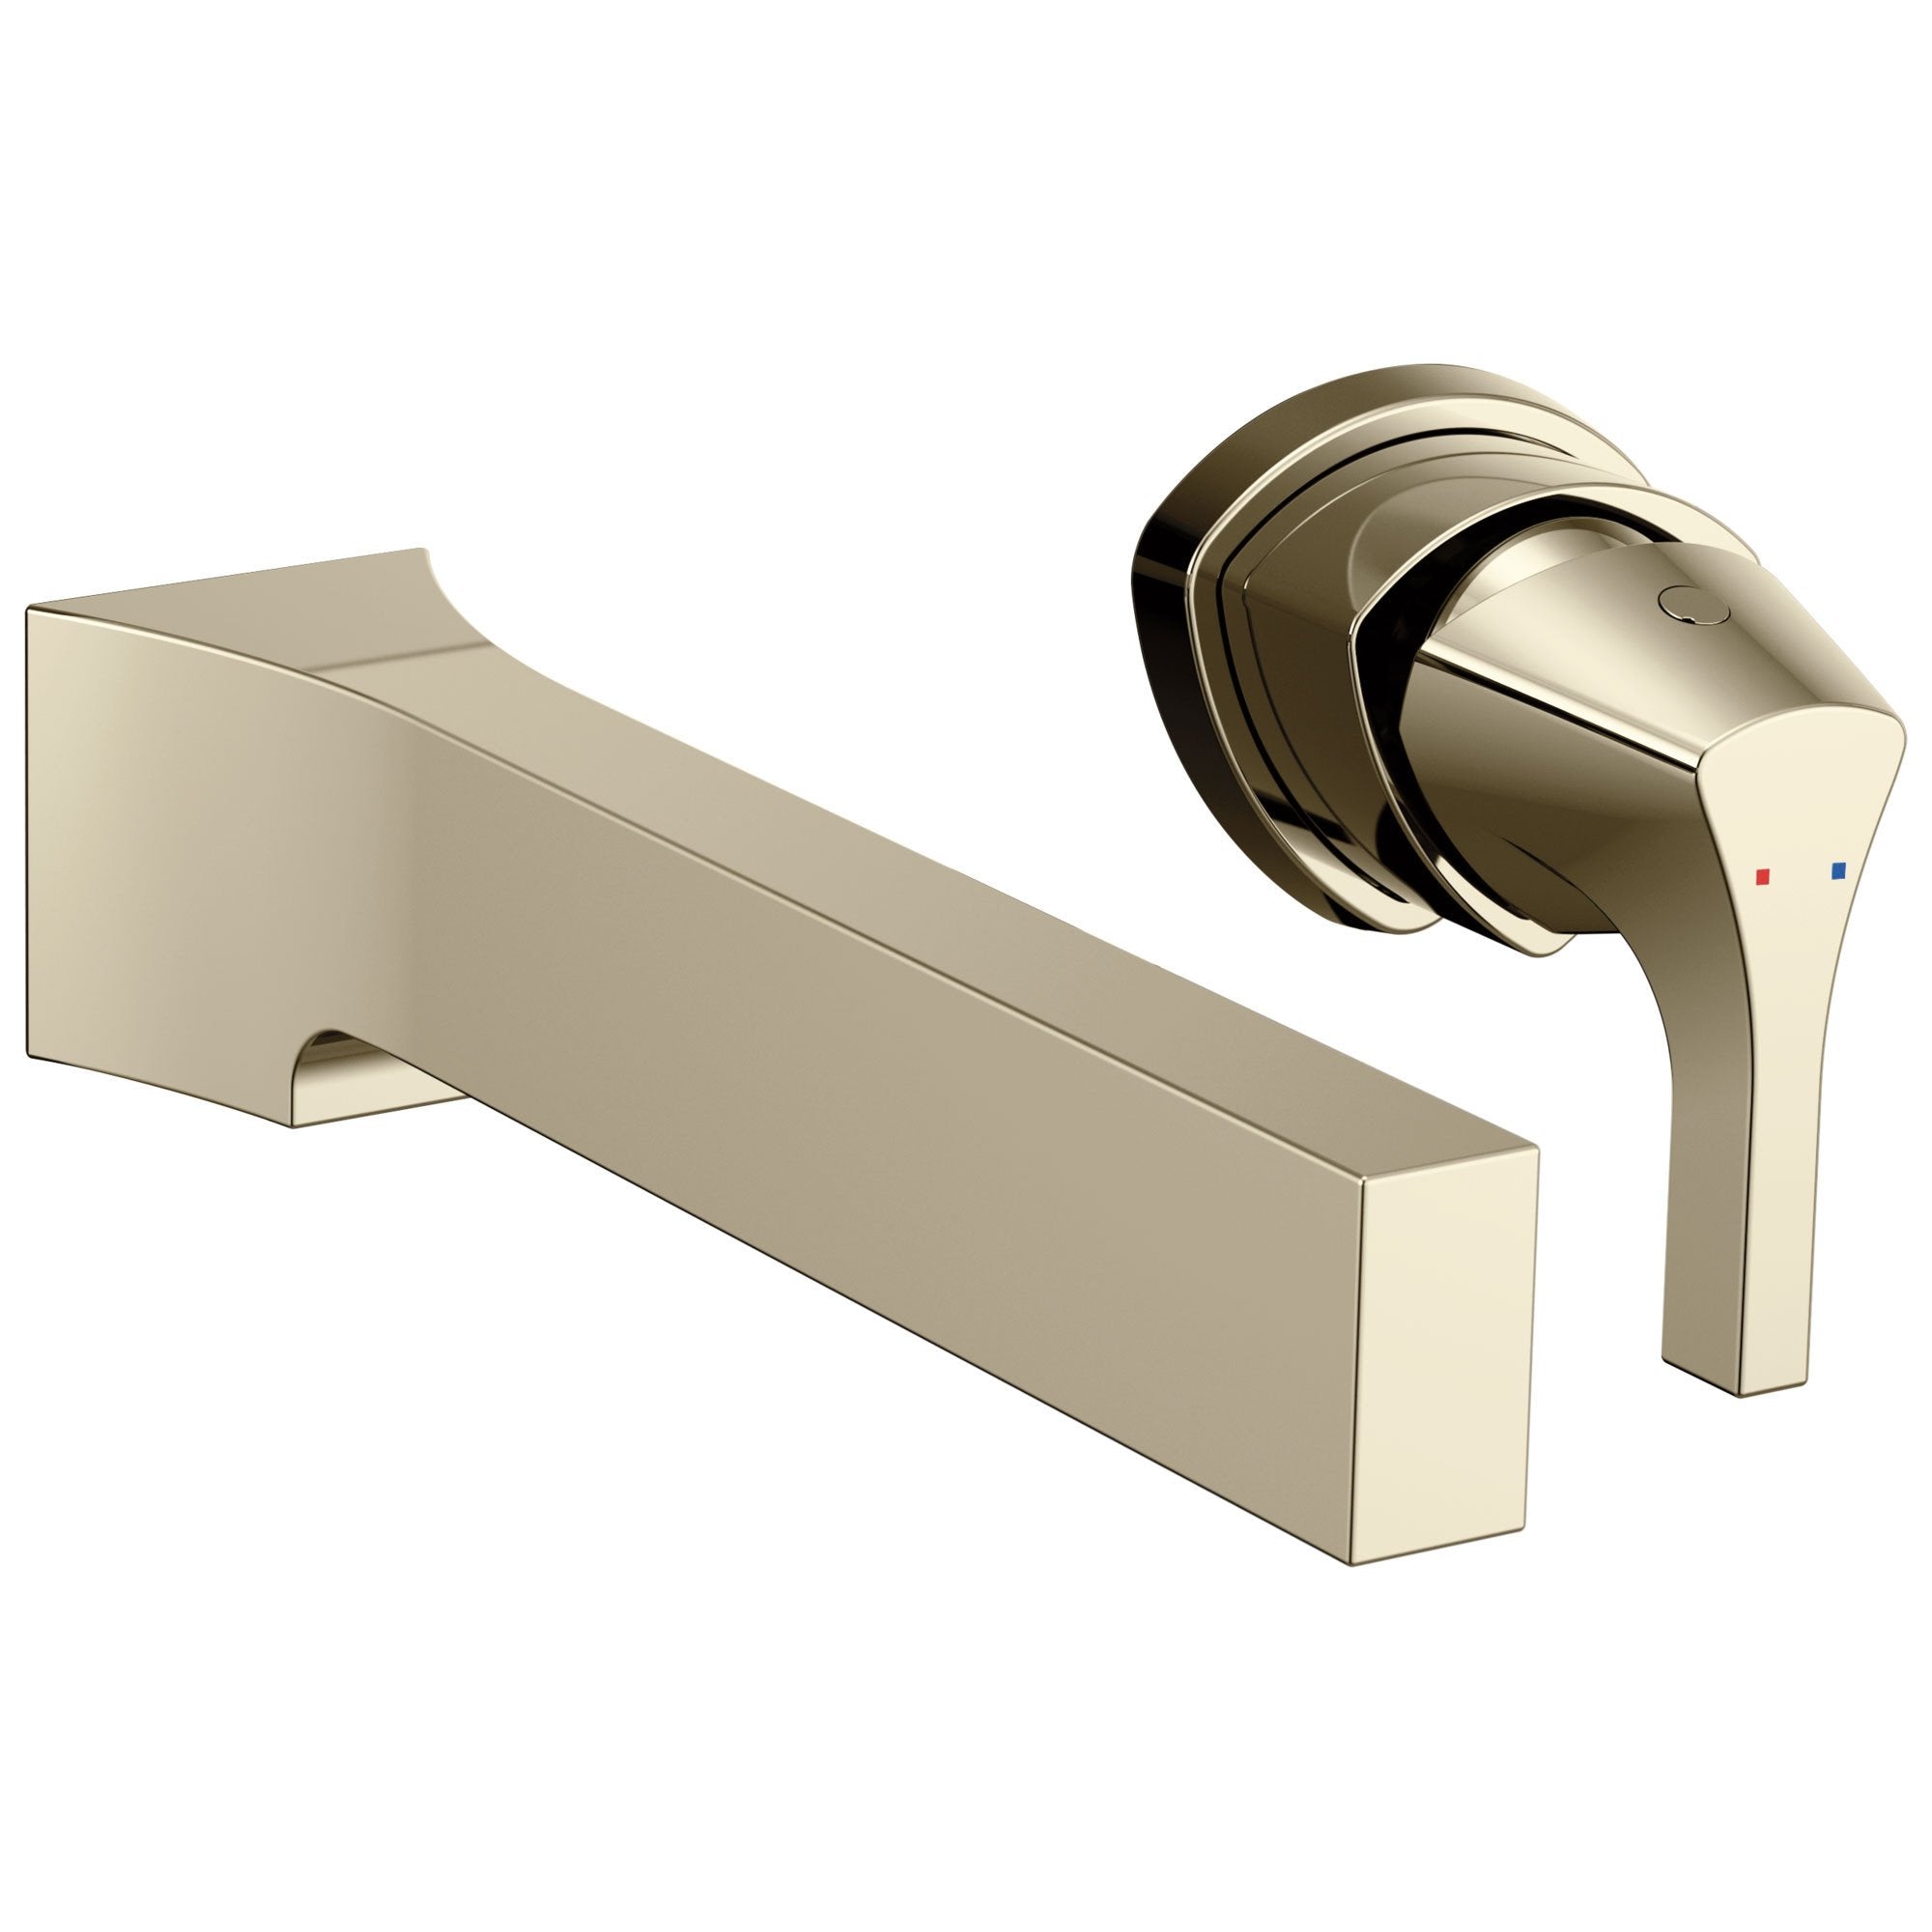 Delta Zura Collection Polished Nickel Finish Single Handle Modern Wall Mount Lavatory Bathroom Faucet Trim Kit (Requires Rough-in Valve) 745572